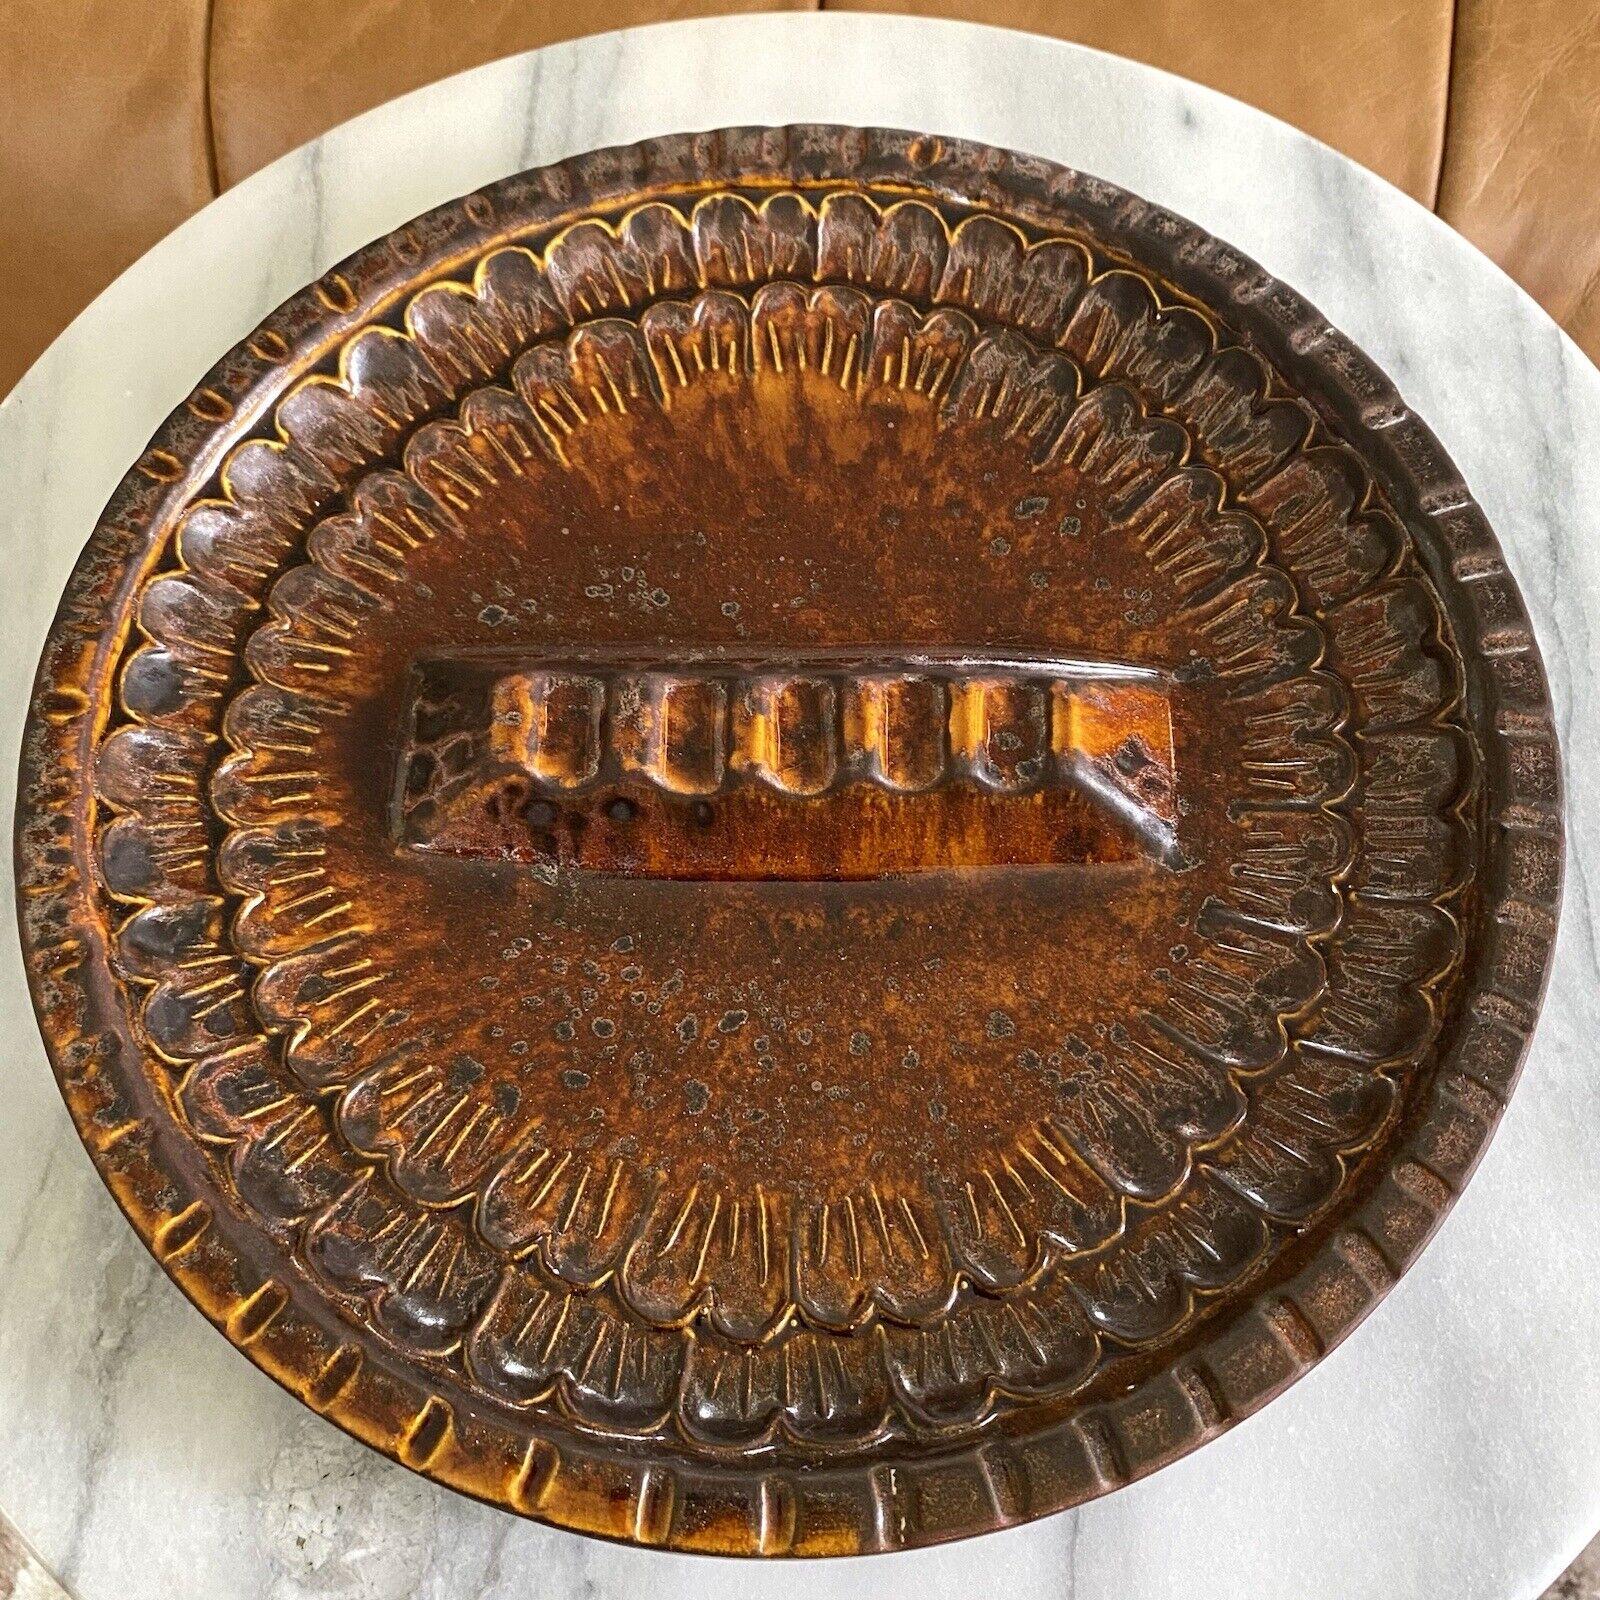 Vintage MCM Hippie Pottery Ashtray Round Textured Brown Catchall Dish Tray